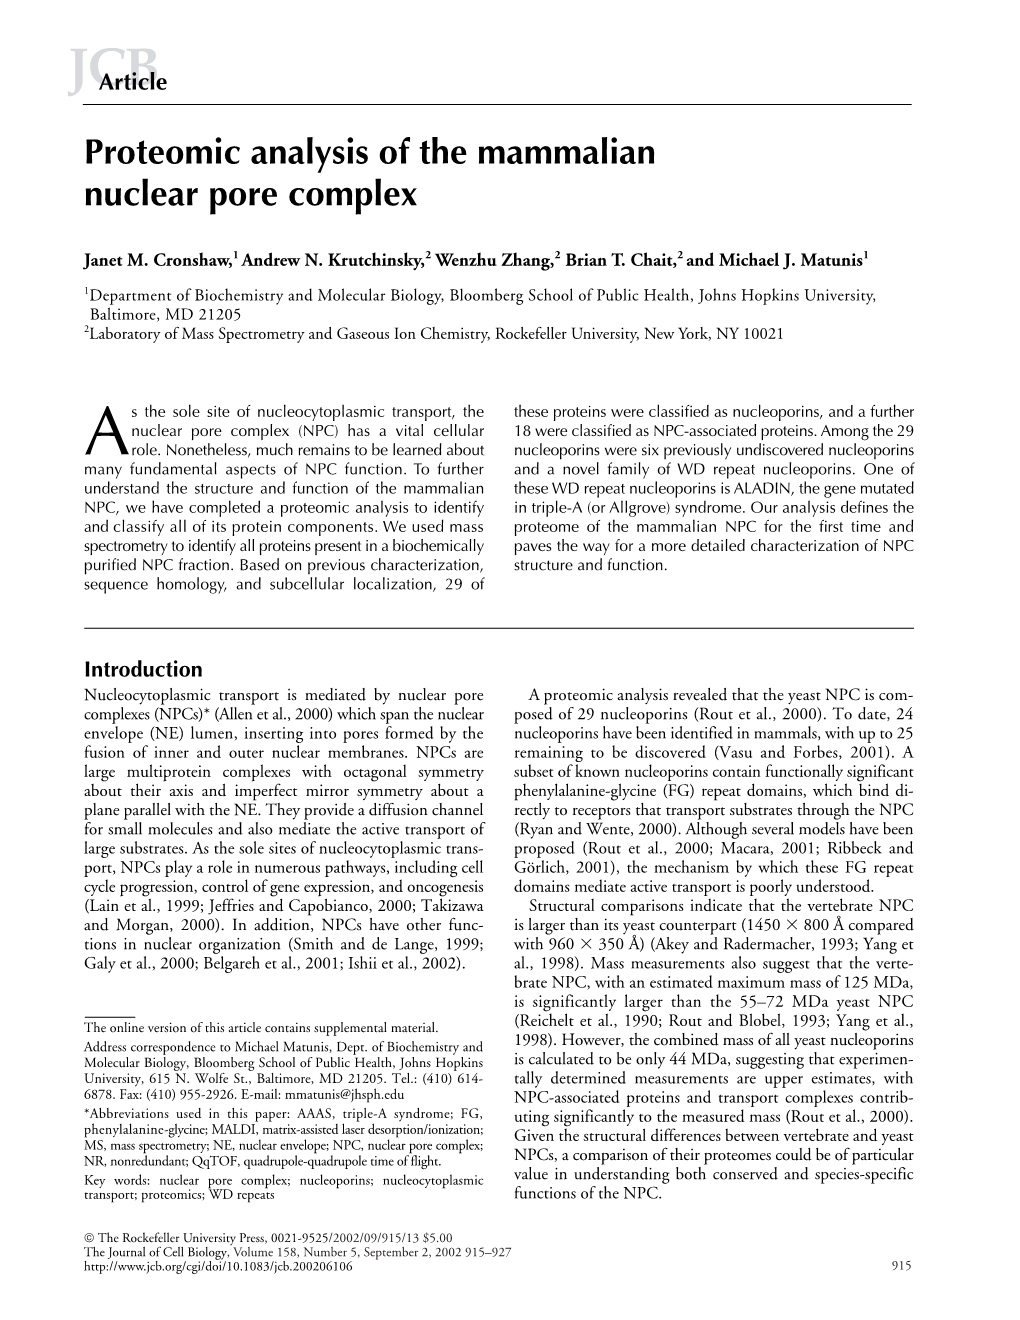 Proteomic Analysis of the Mammalian Nuclear Pore Complex